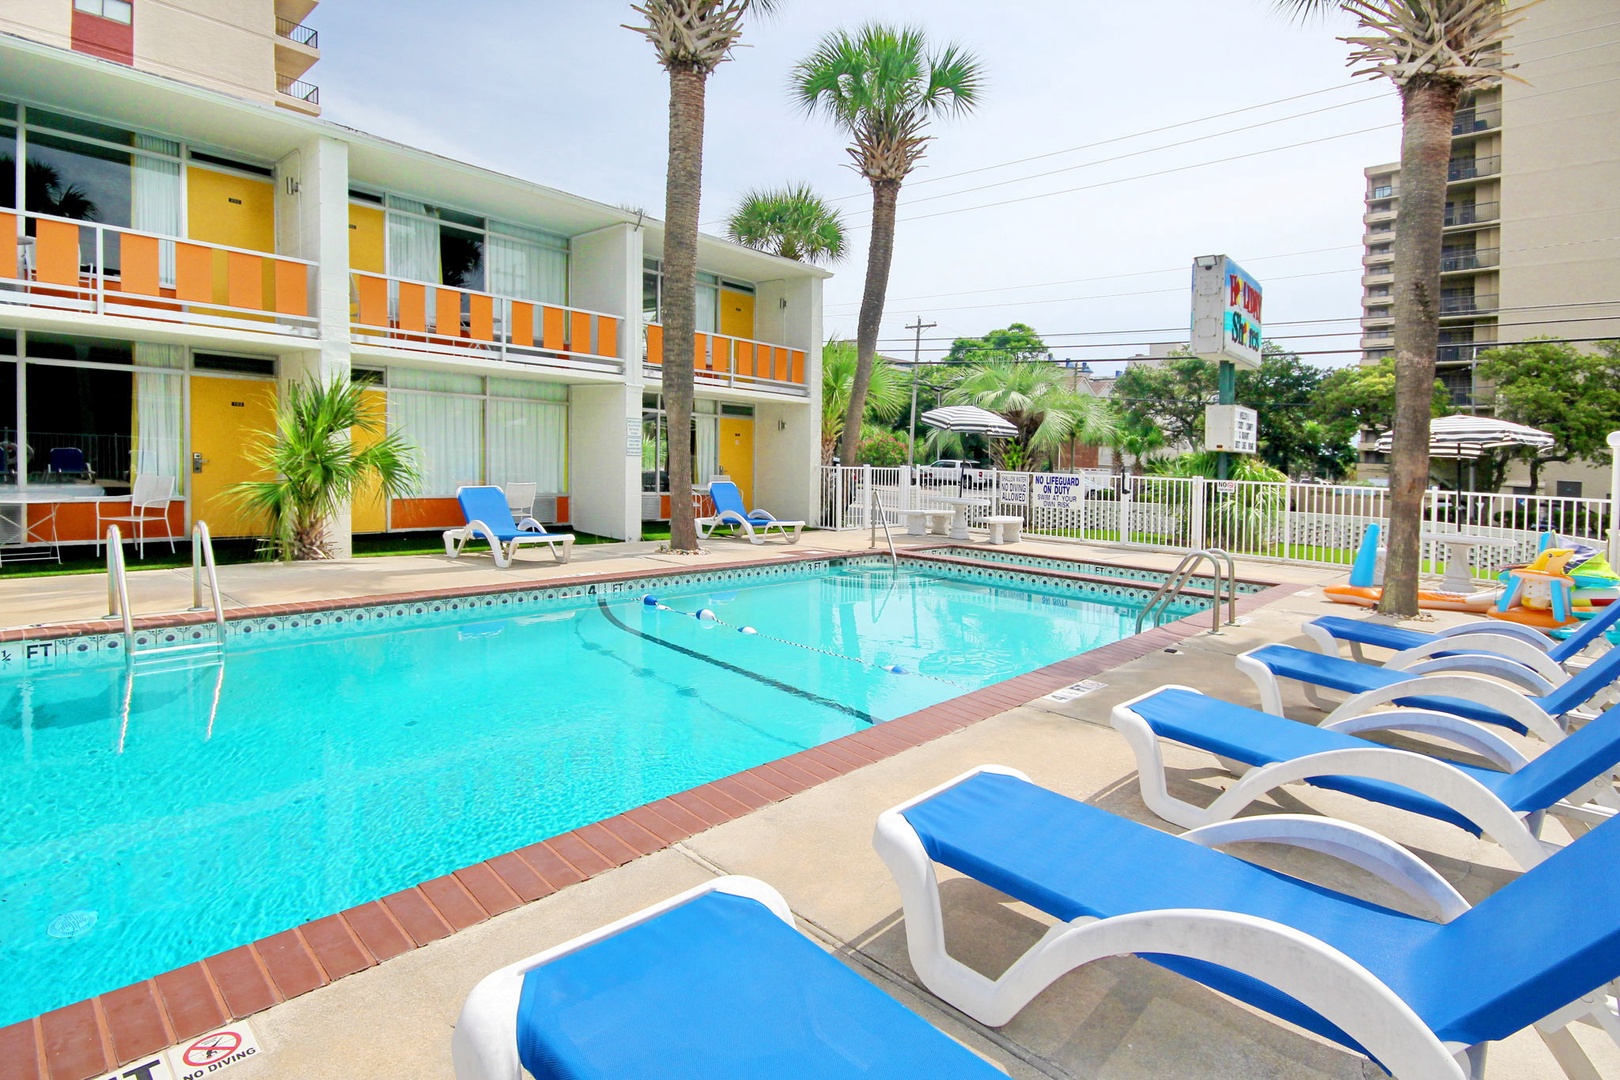 Vacation homes in Myrtle Beach